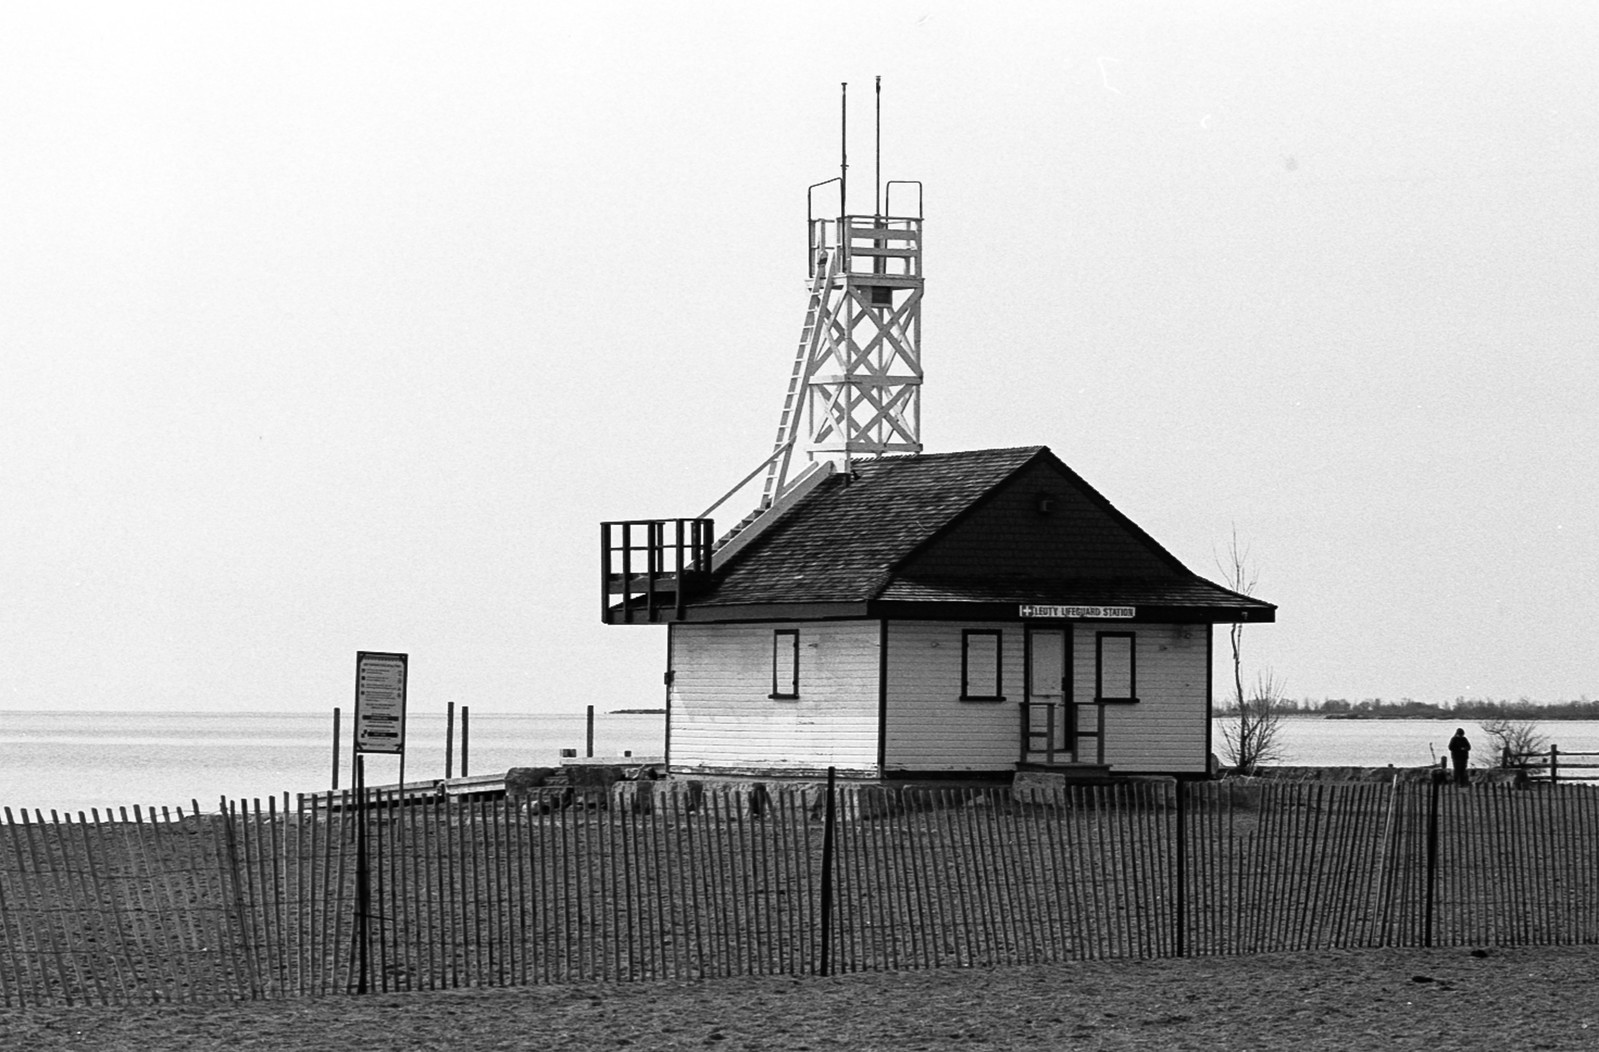 Leuty Ave Lifeguard Station from the Boardwalk